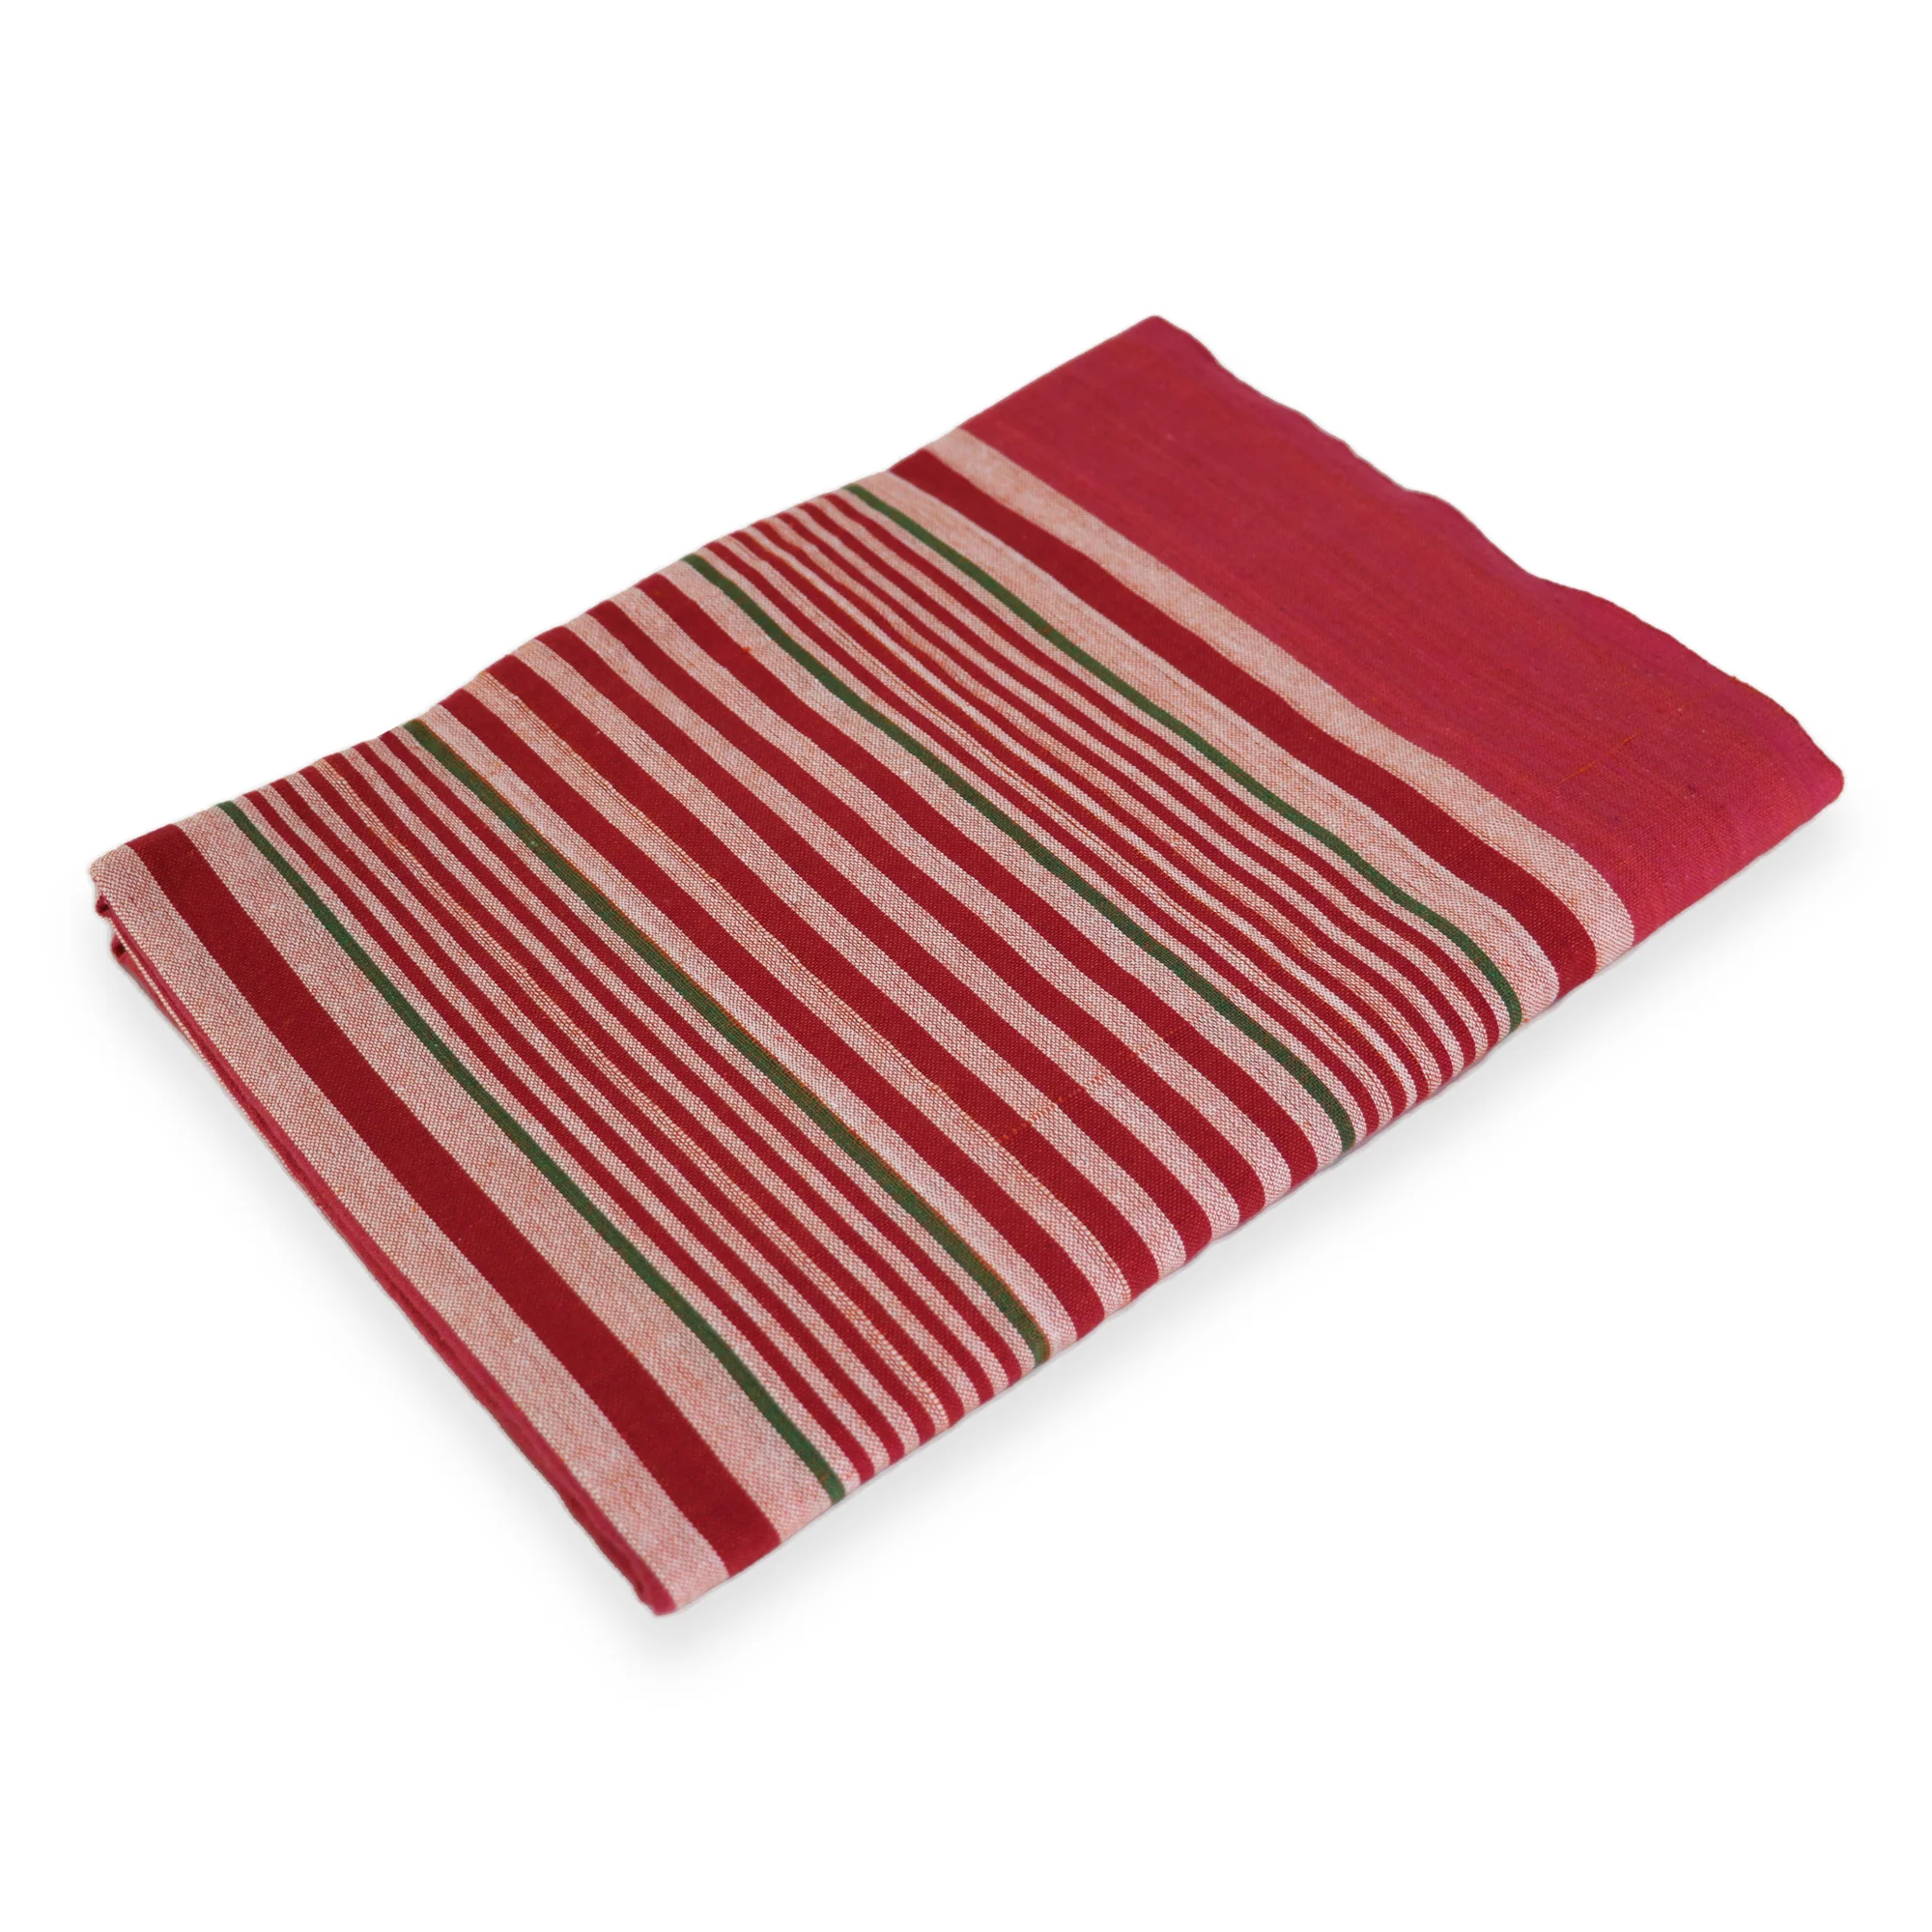 Red Handloom Cotton Bed Sheets 54x80 (Inches) Light Color for Double, Single Beds